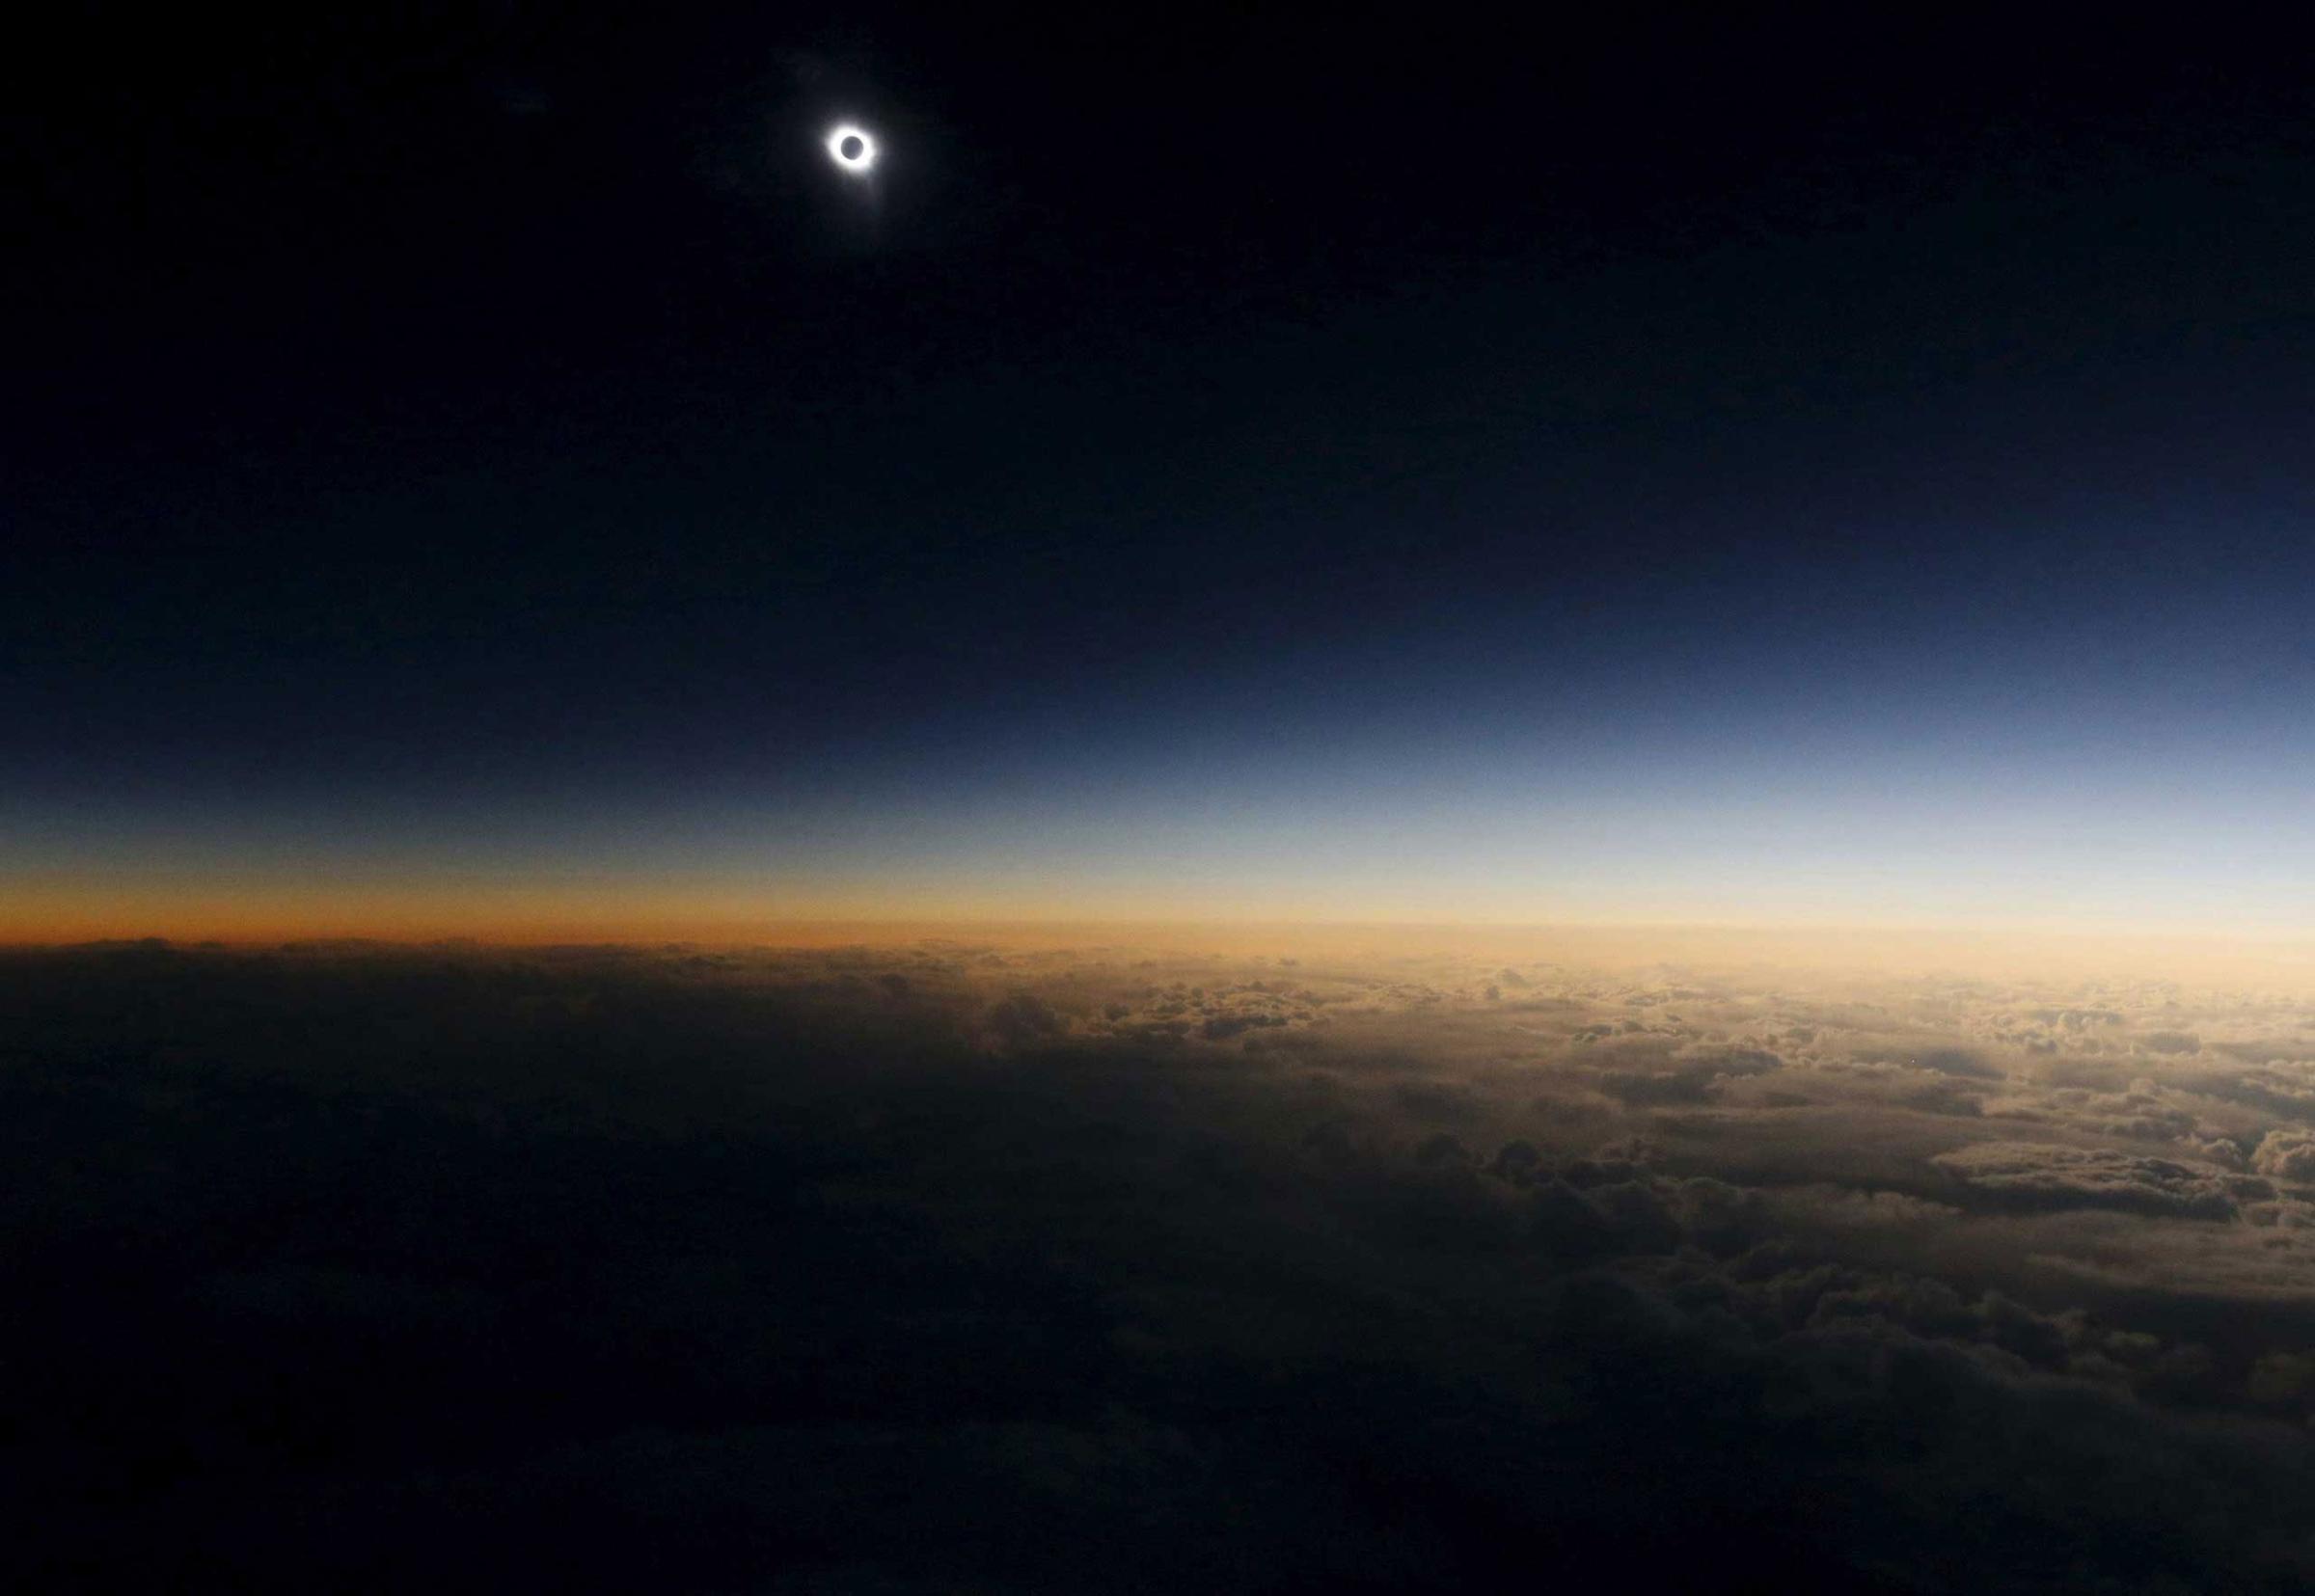 A view from a plane during the so-called "Eclipse Flight" from the Russian city of Murmansk to observe the solar eclipse above the neutral waters of the Norwegian Sea. March 20, 2015.